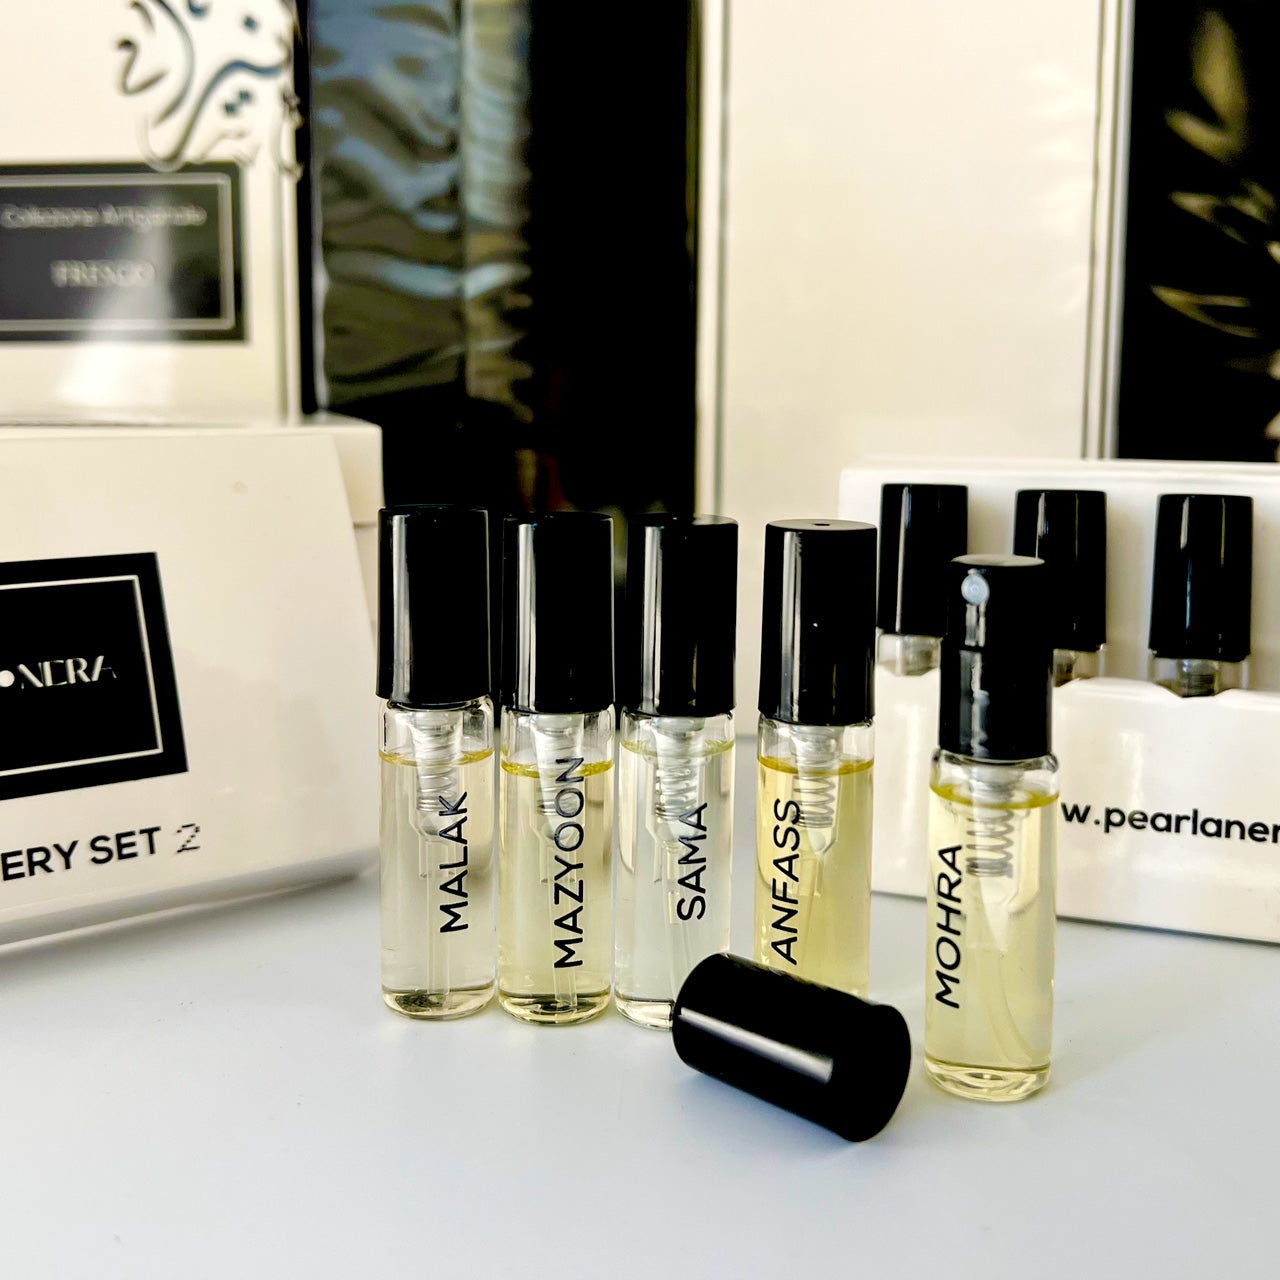 PEARLANERA is bringing the art of browsing to life by sending "discovery sets" directly to your door. Each is filled with a collection of sample-size scents —  five —that are far more substantial than typical single-spray testers.